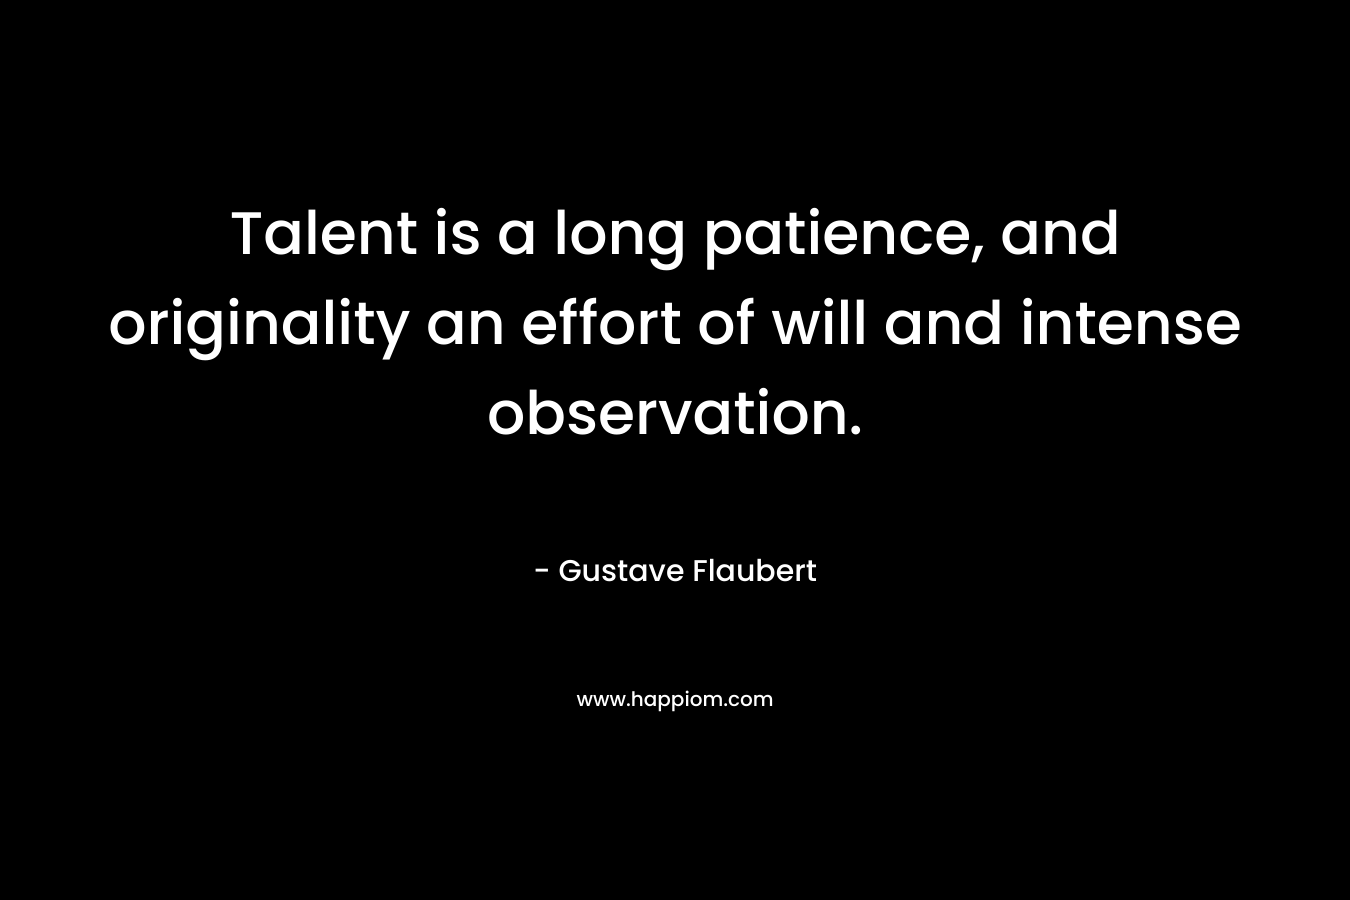 Talent is a long patience, and originality an effort of will and intense observation. – Gustave Flaubert